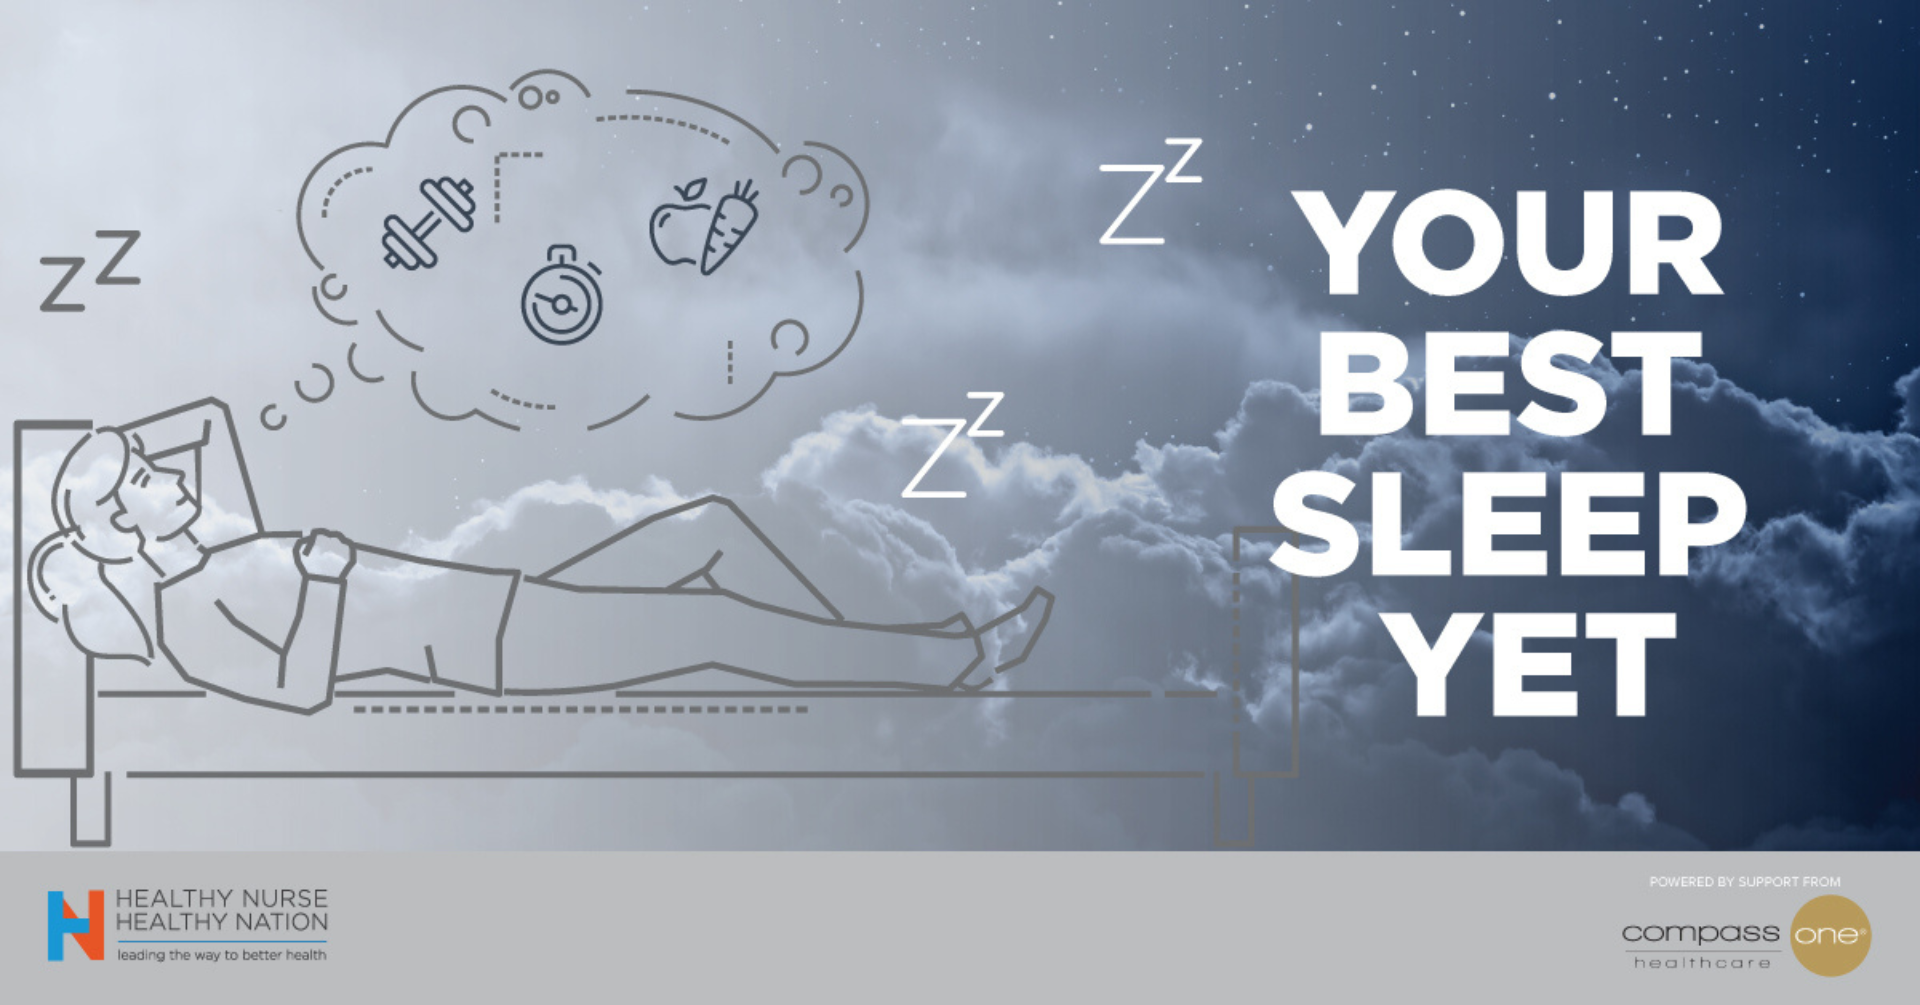 Your Best Sleep Yet! powered by CompassOne Healthcare 46